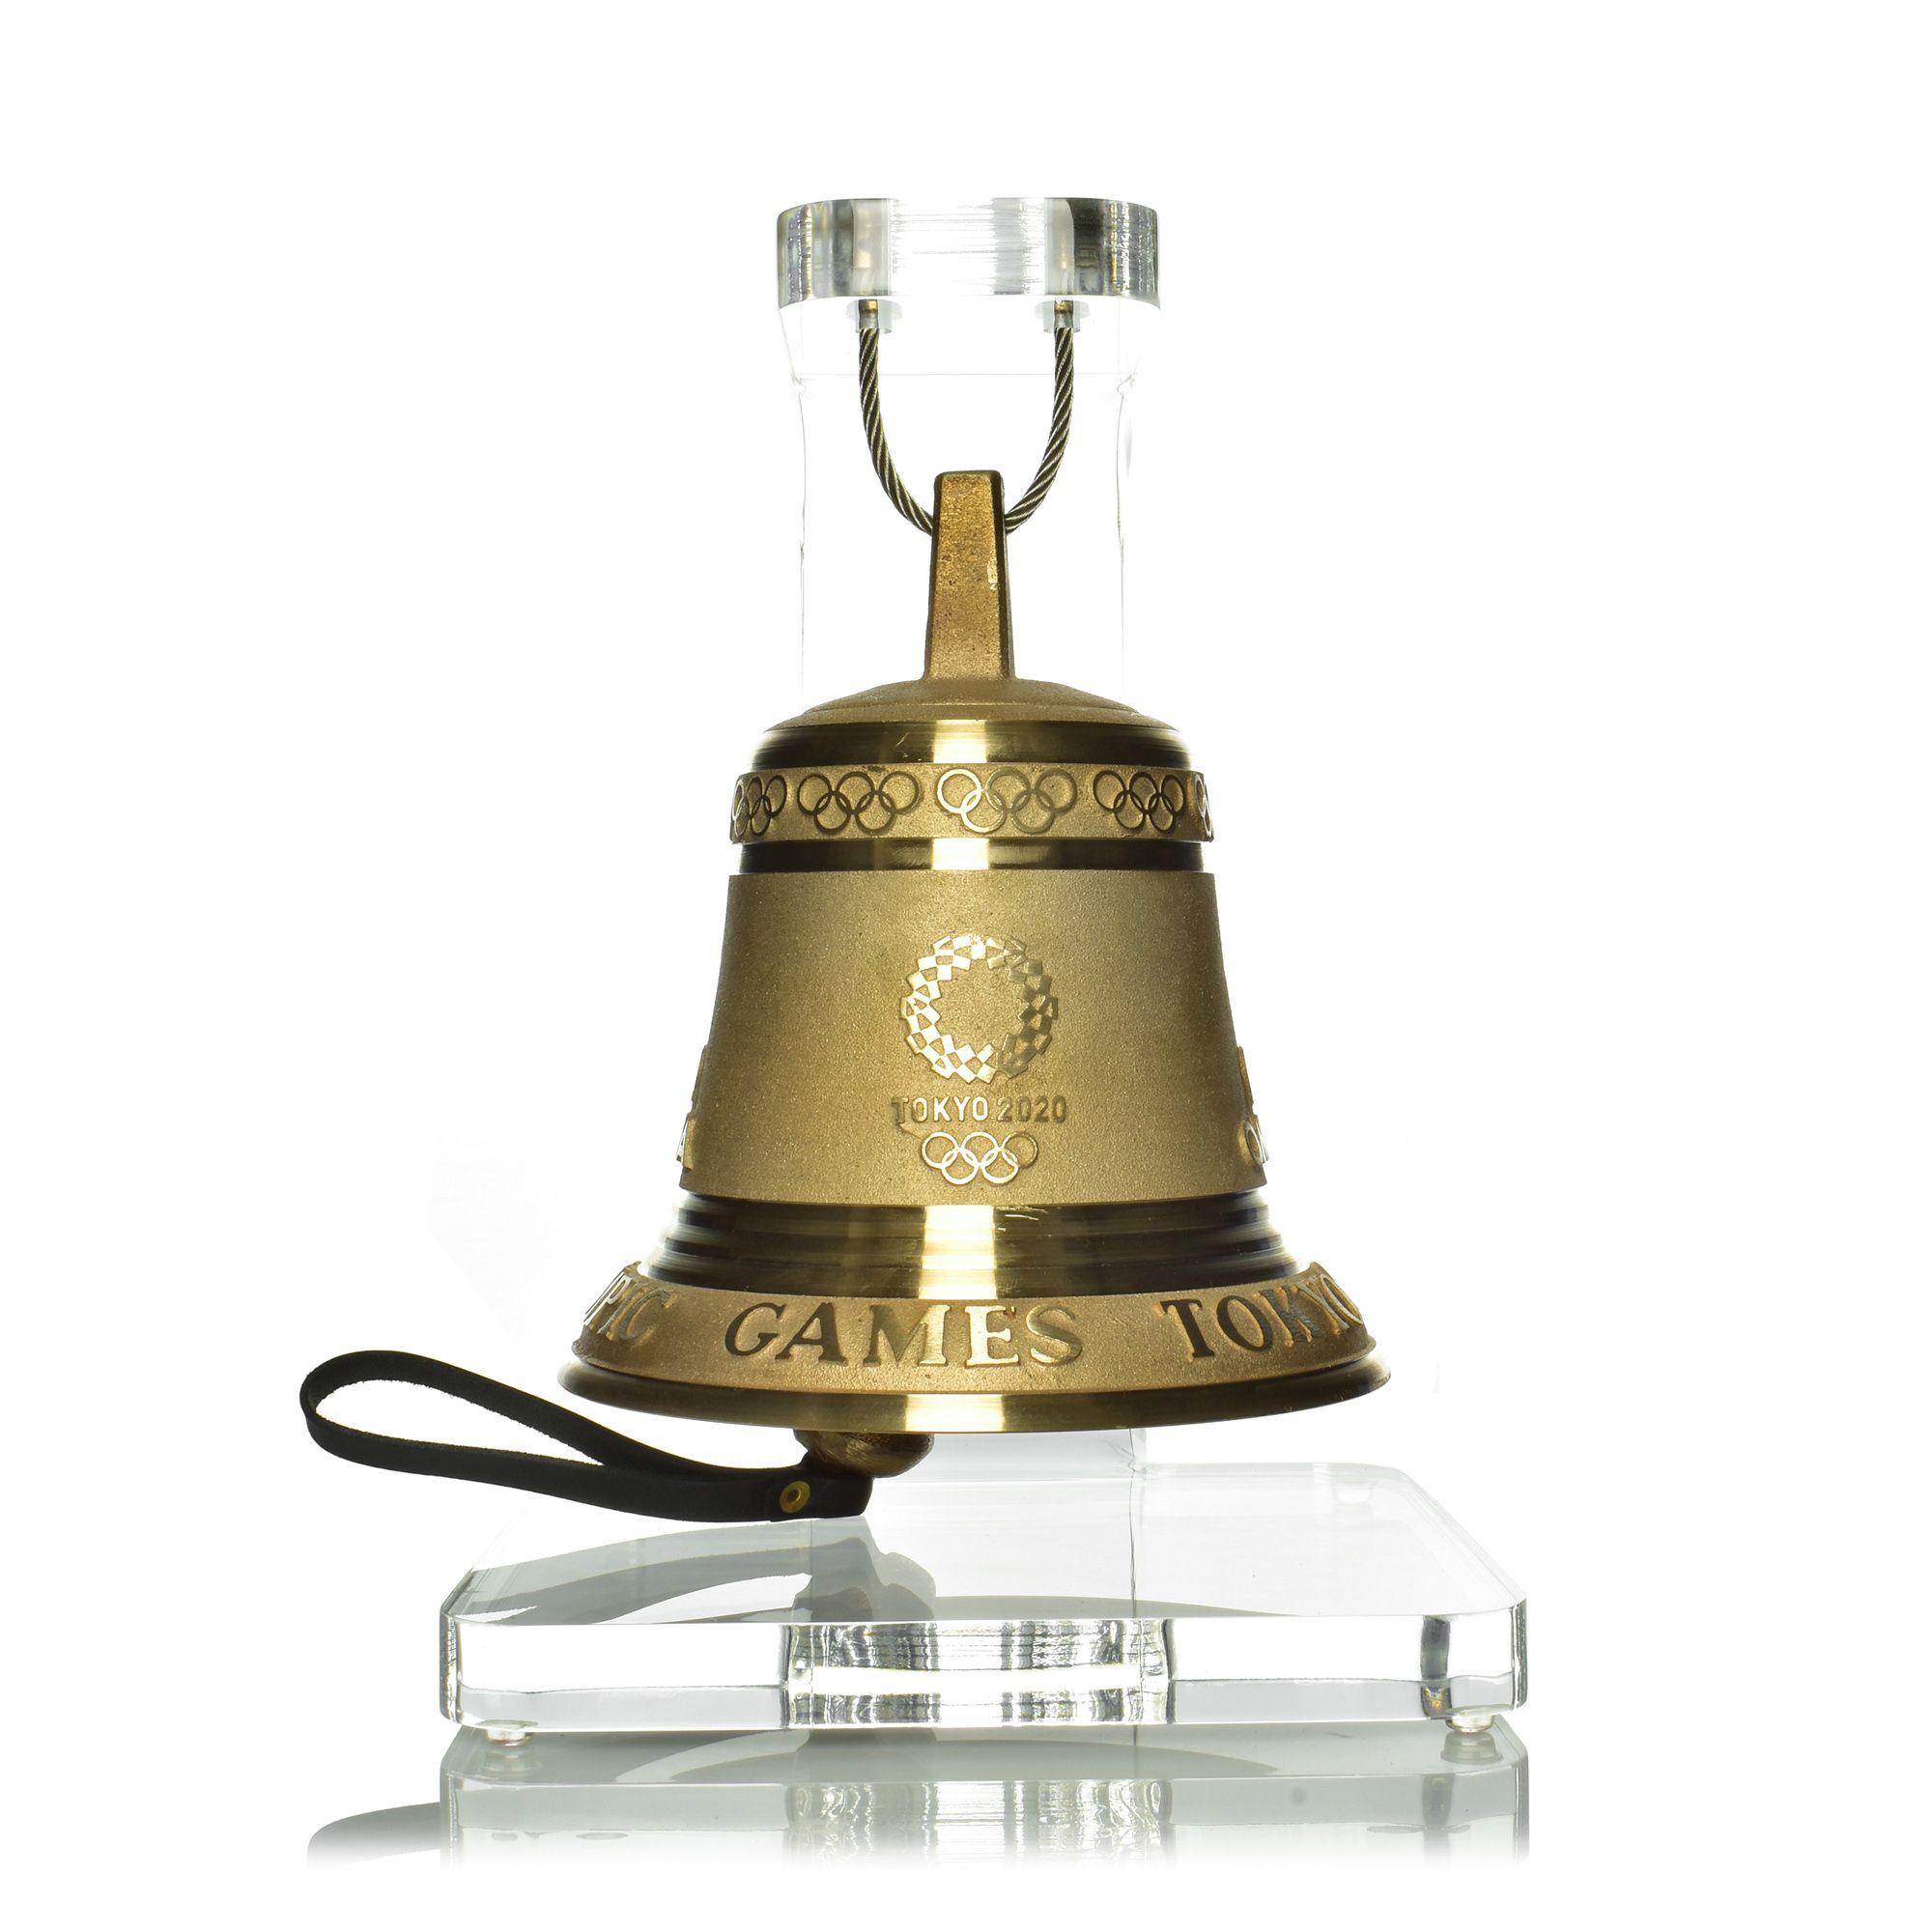 The final lap bell from the Tokyo Olympic Games